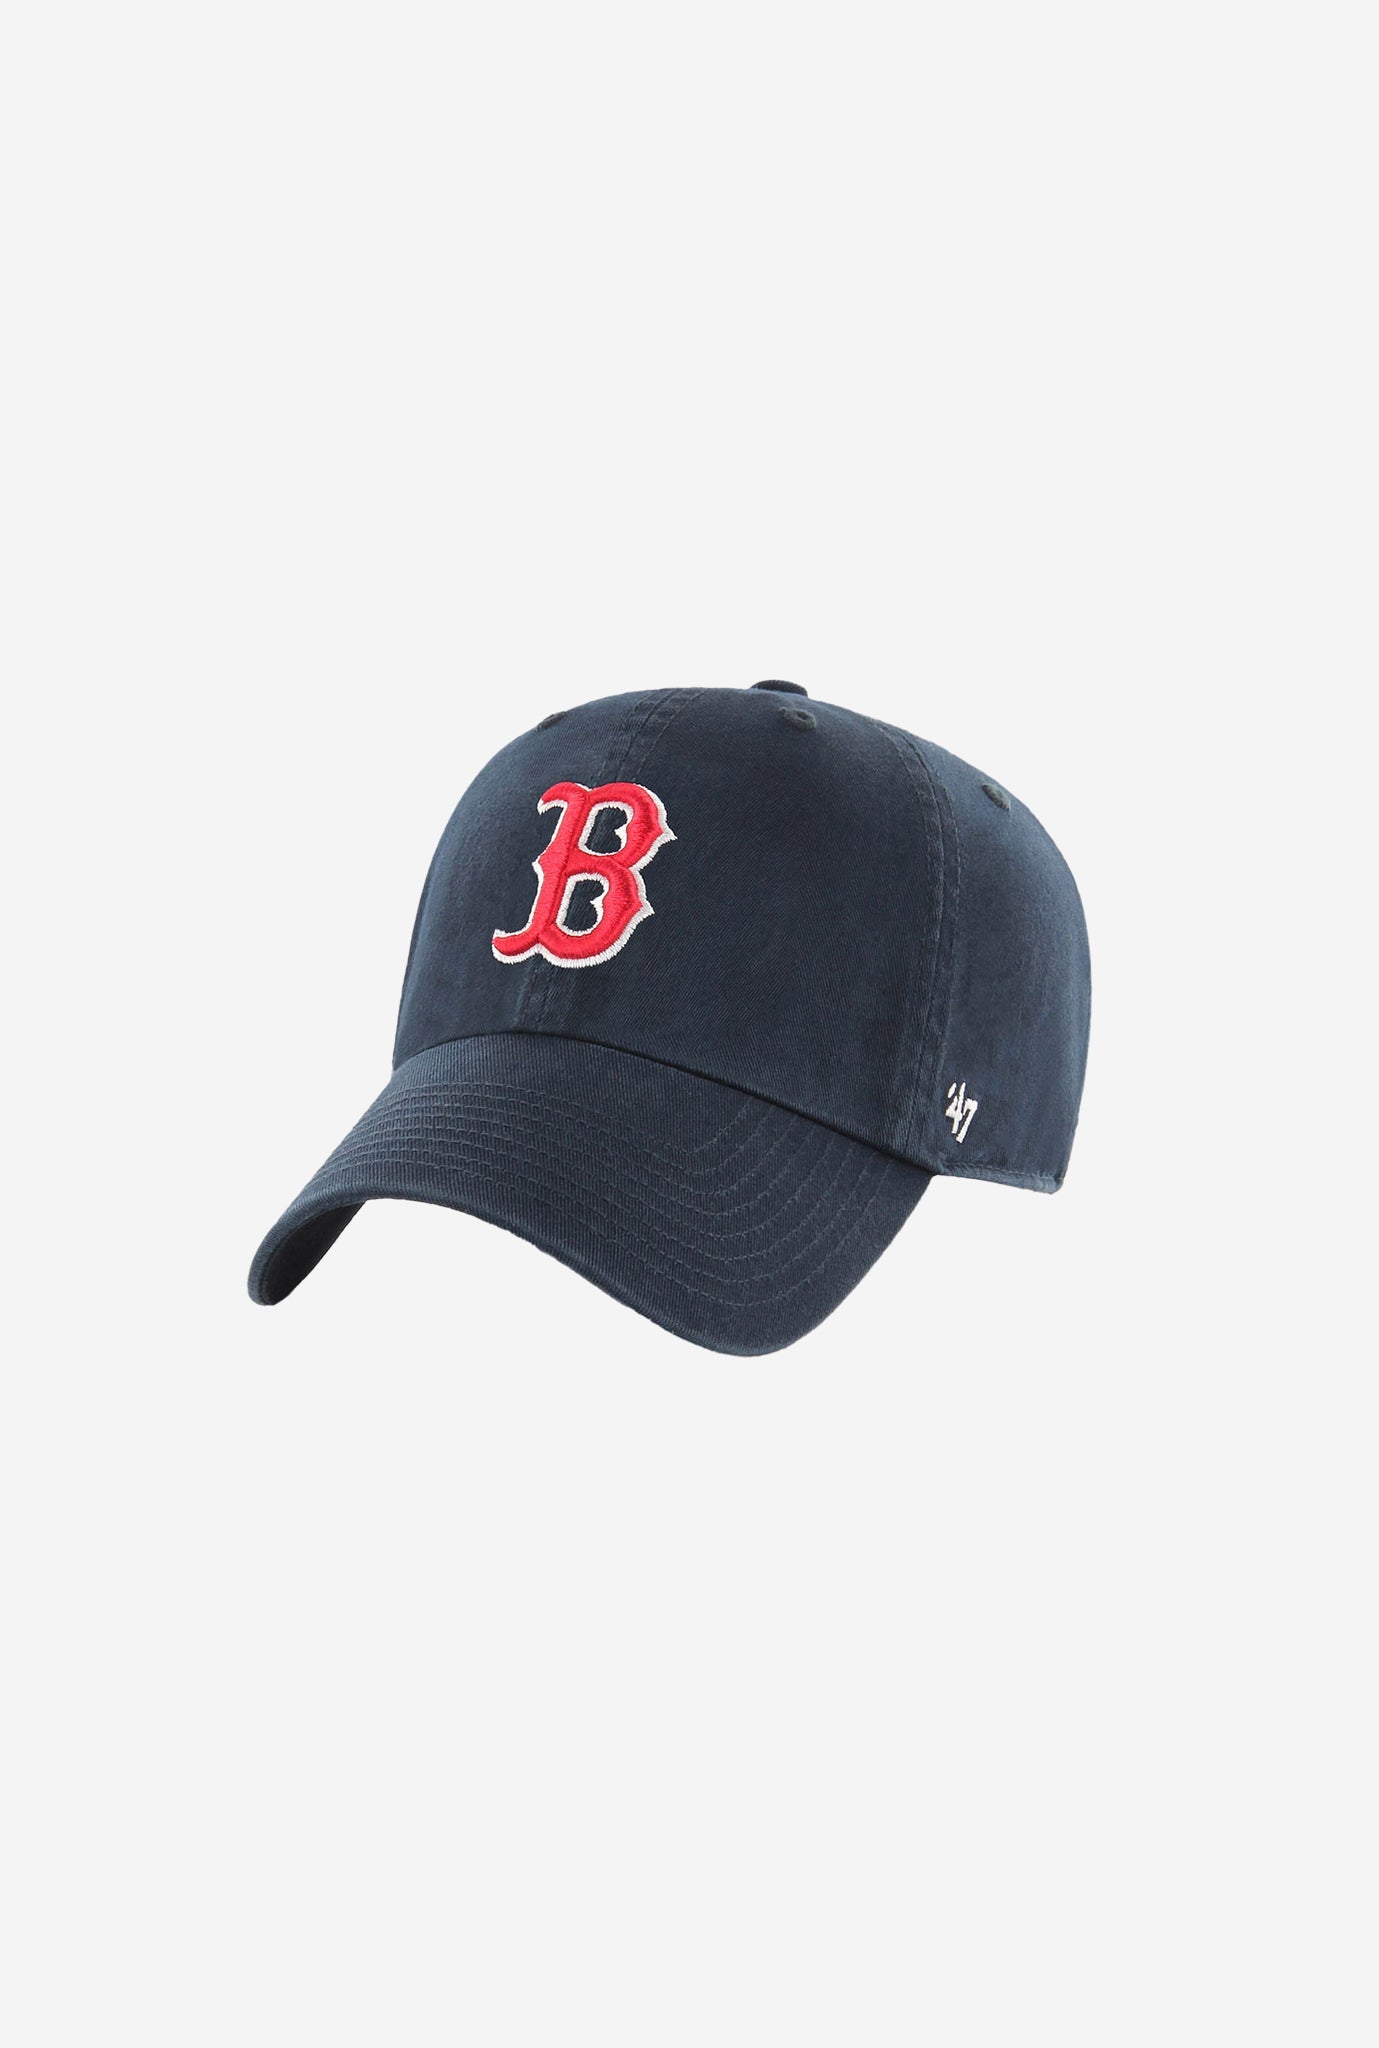 Boston Red Sox Clean Up Cap - Navy